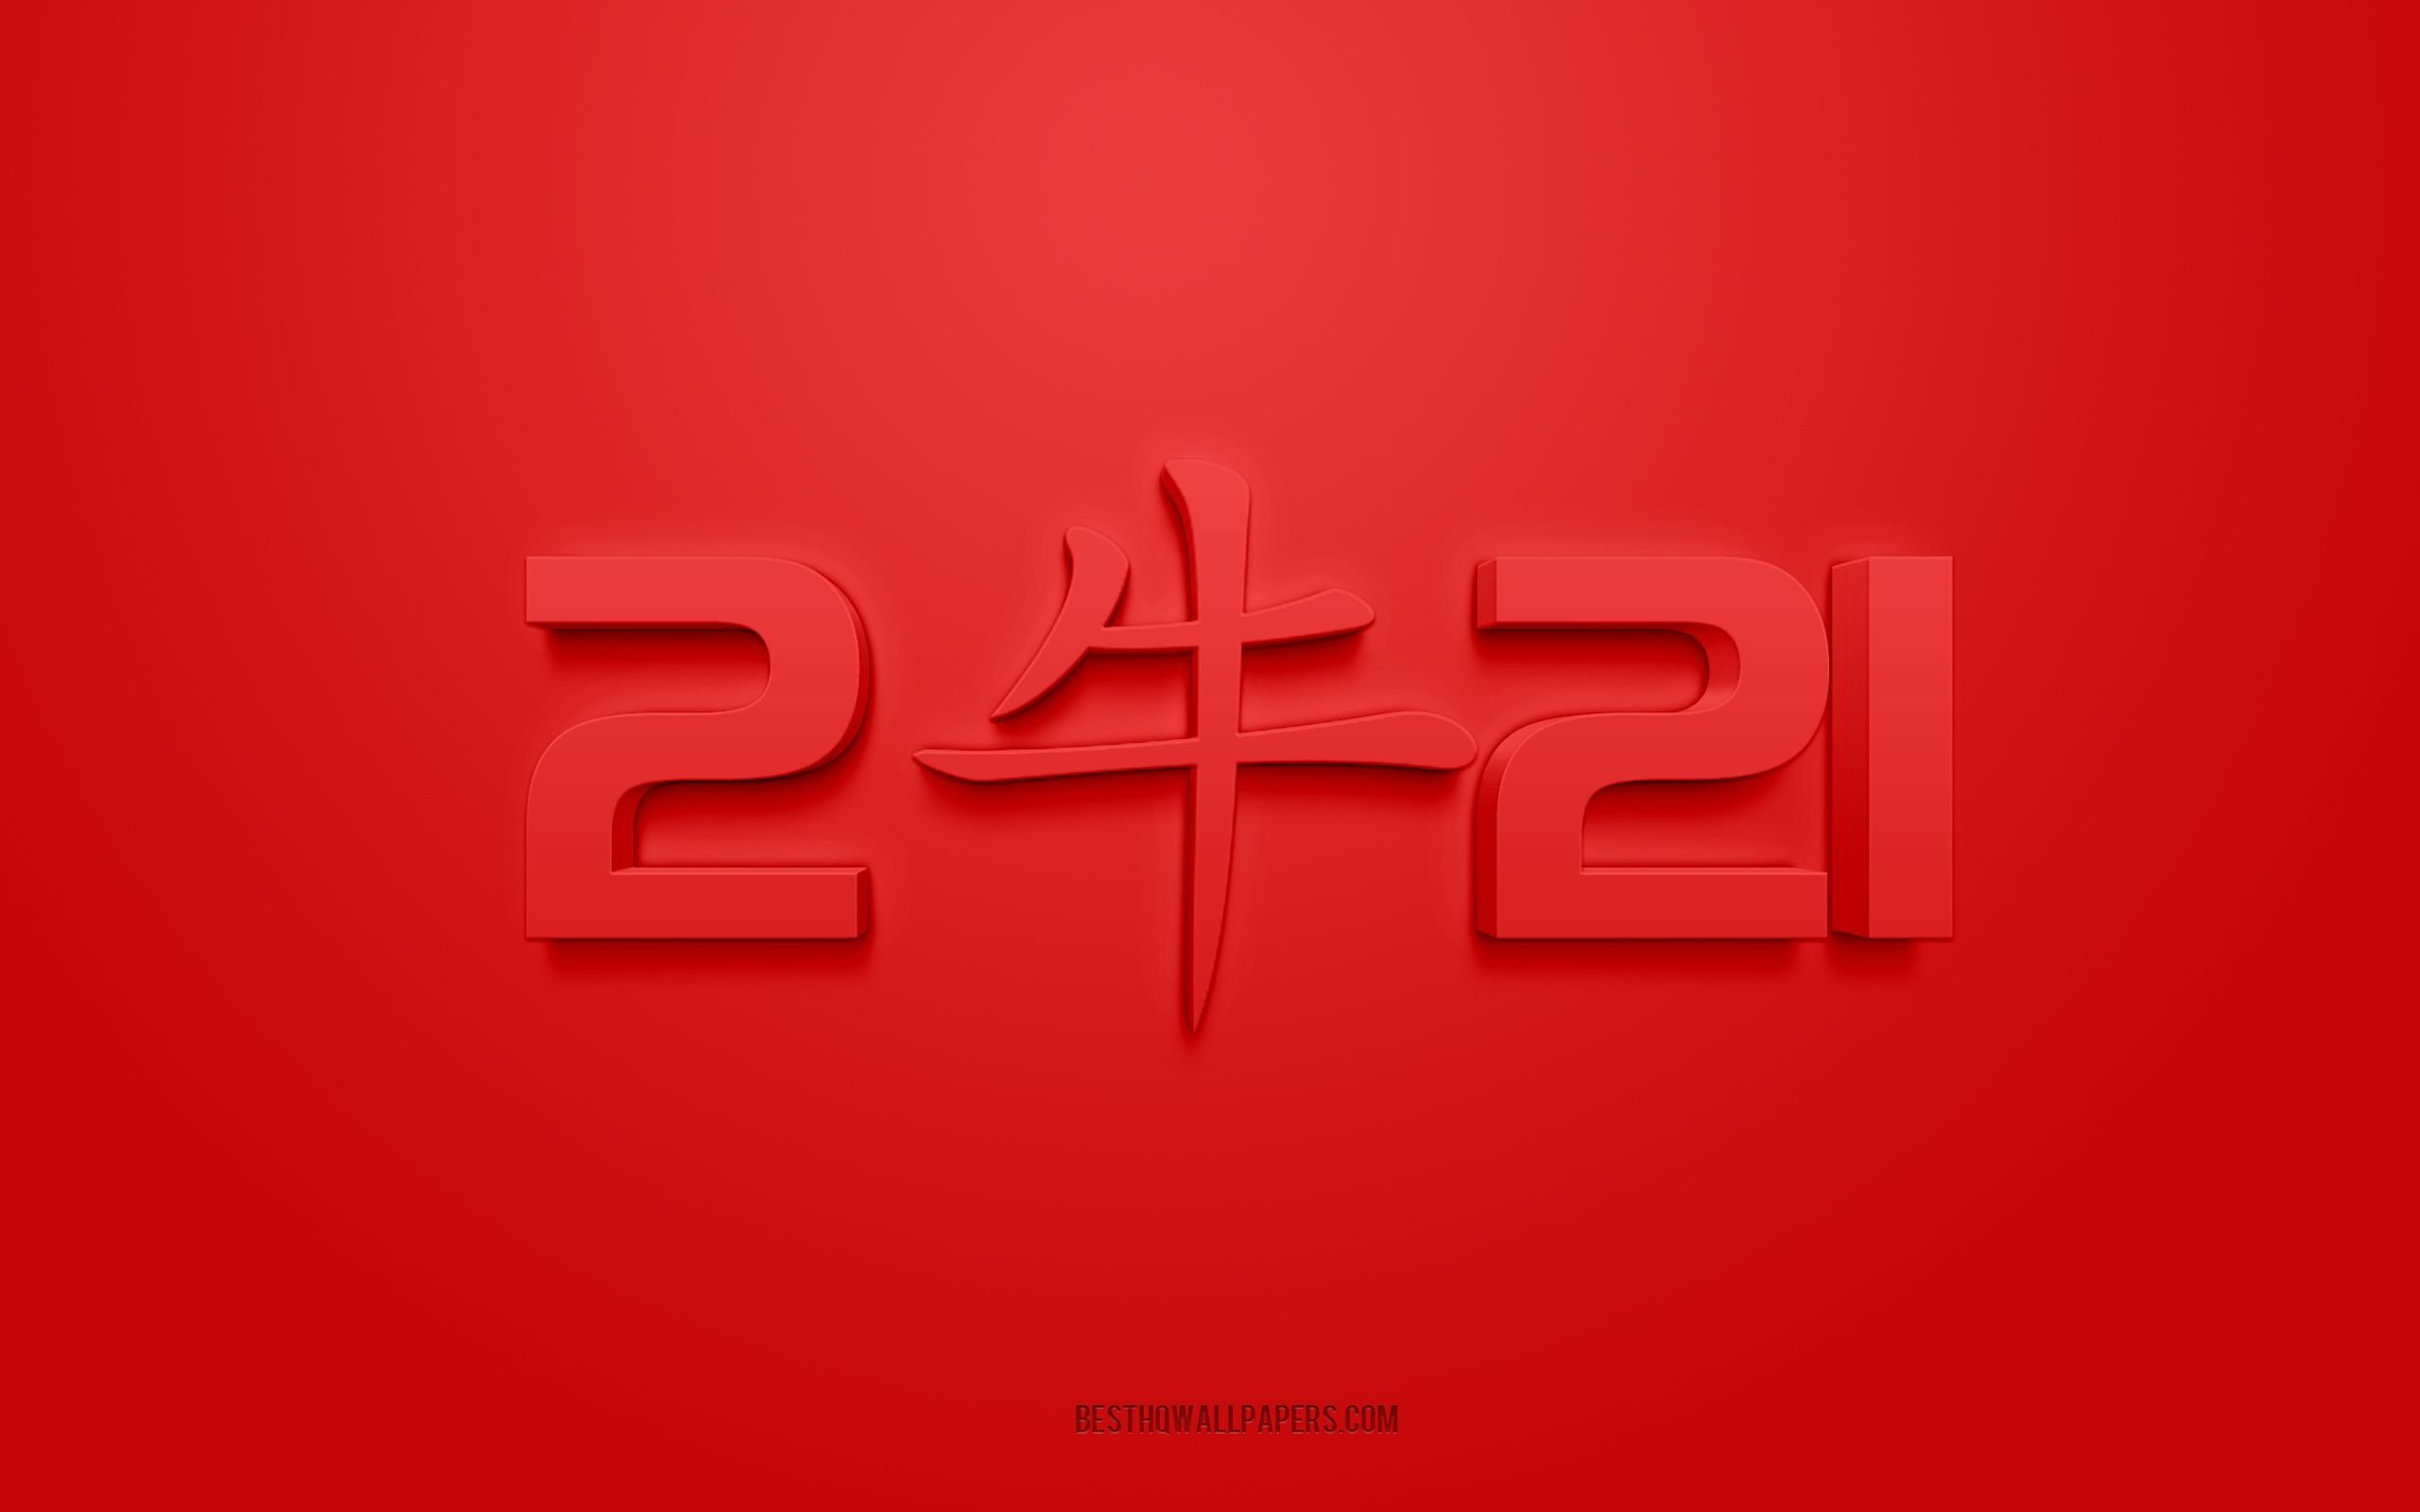 Download wallpaper 2021 New Year, Chinese calendar, 2021 Ox year, Ox hieroglyph, Happy New Year Red 2021 3D background, Ox 2021 background for desktop with resolution 2560x1600. High Quality HD picture wallpaper